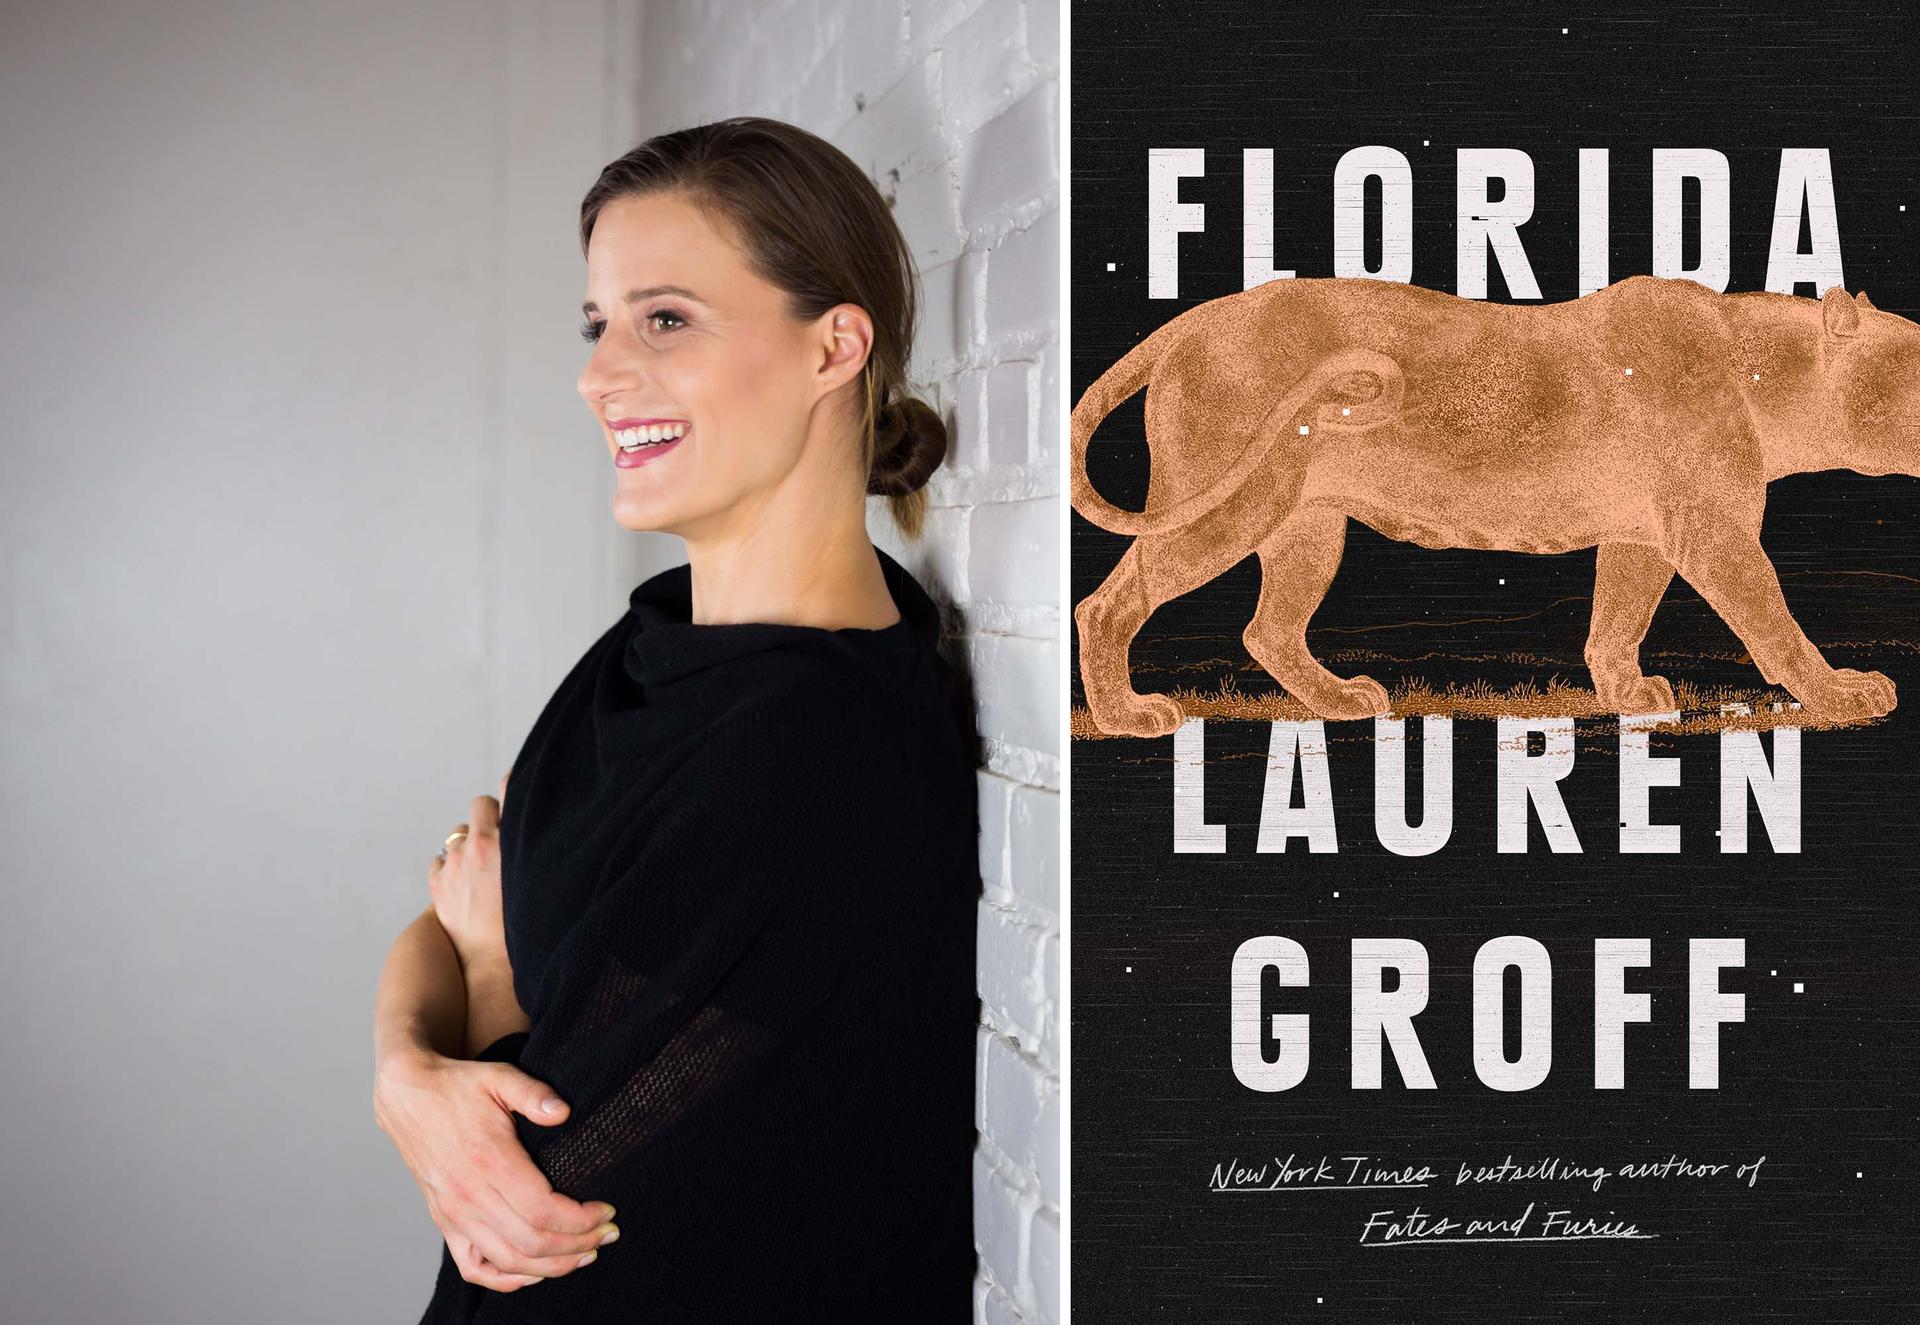 Lauren Groff and the cover of her new book, “Florida.”